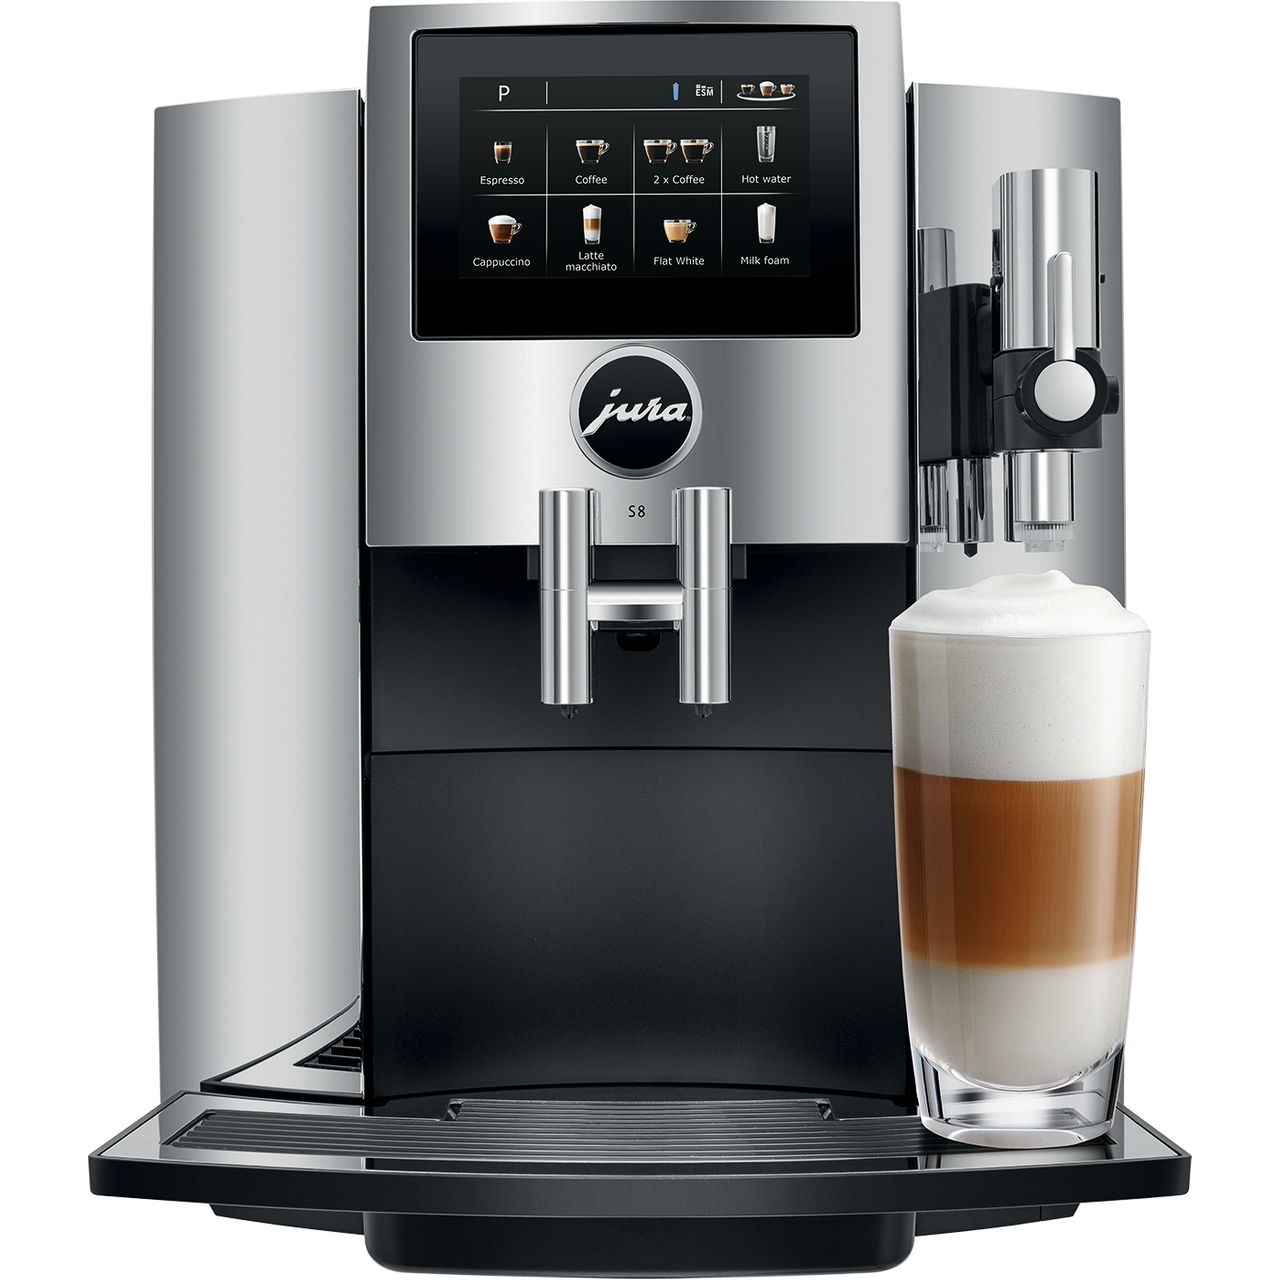 Jura S8 15228 Bean to Cup Coffee Machine Review